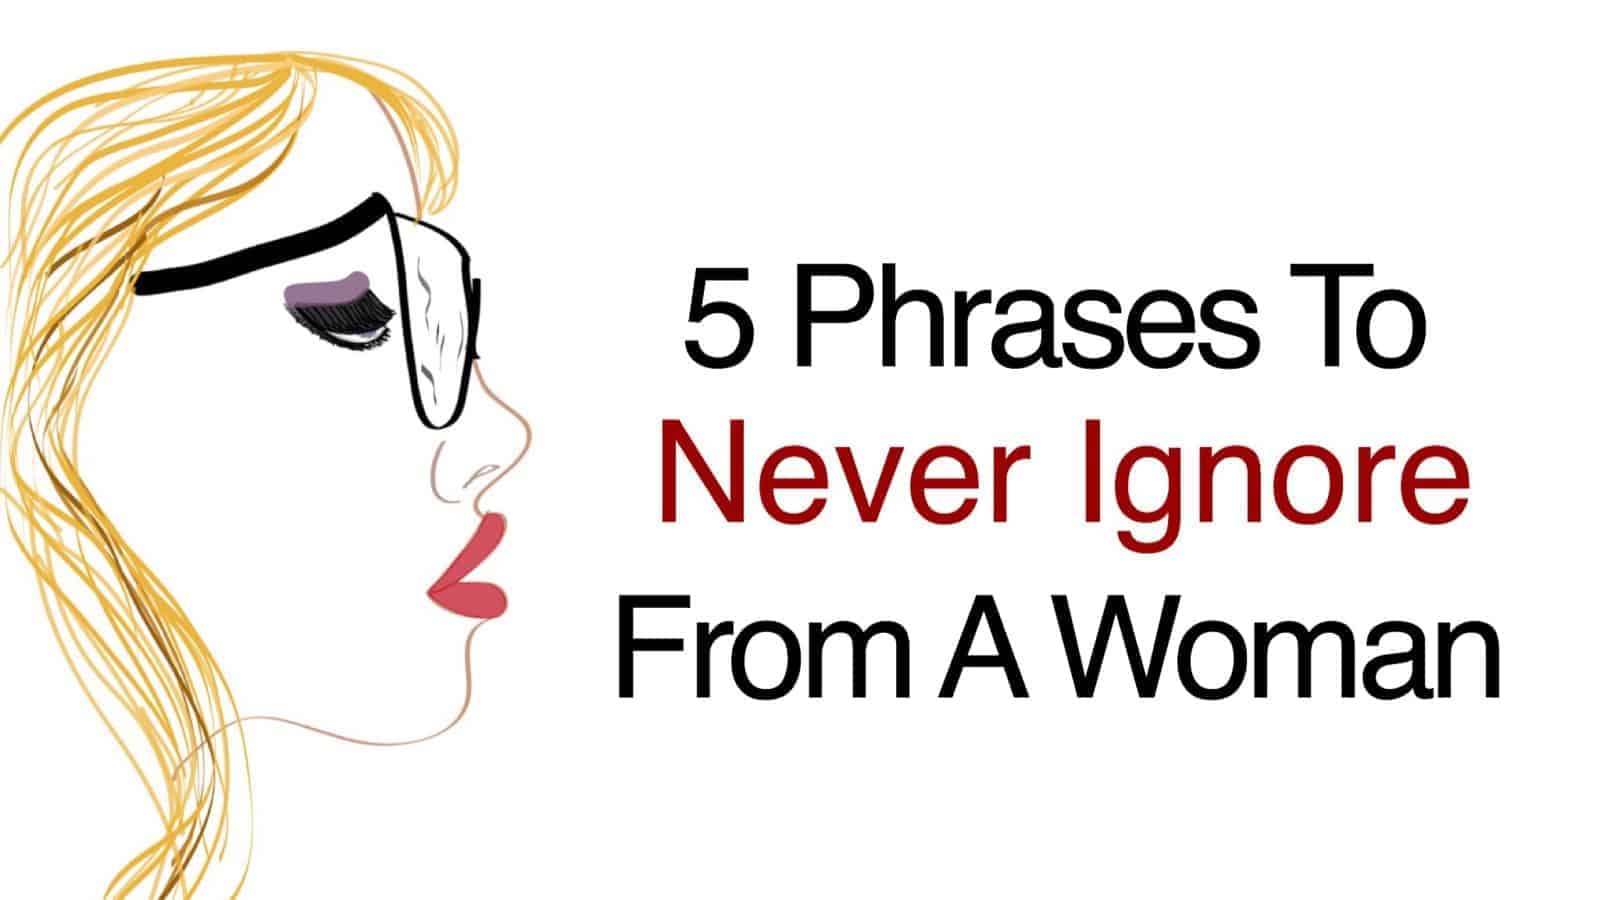 5 Phrases to Never Ignore From A Woman